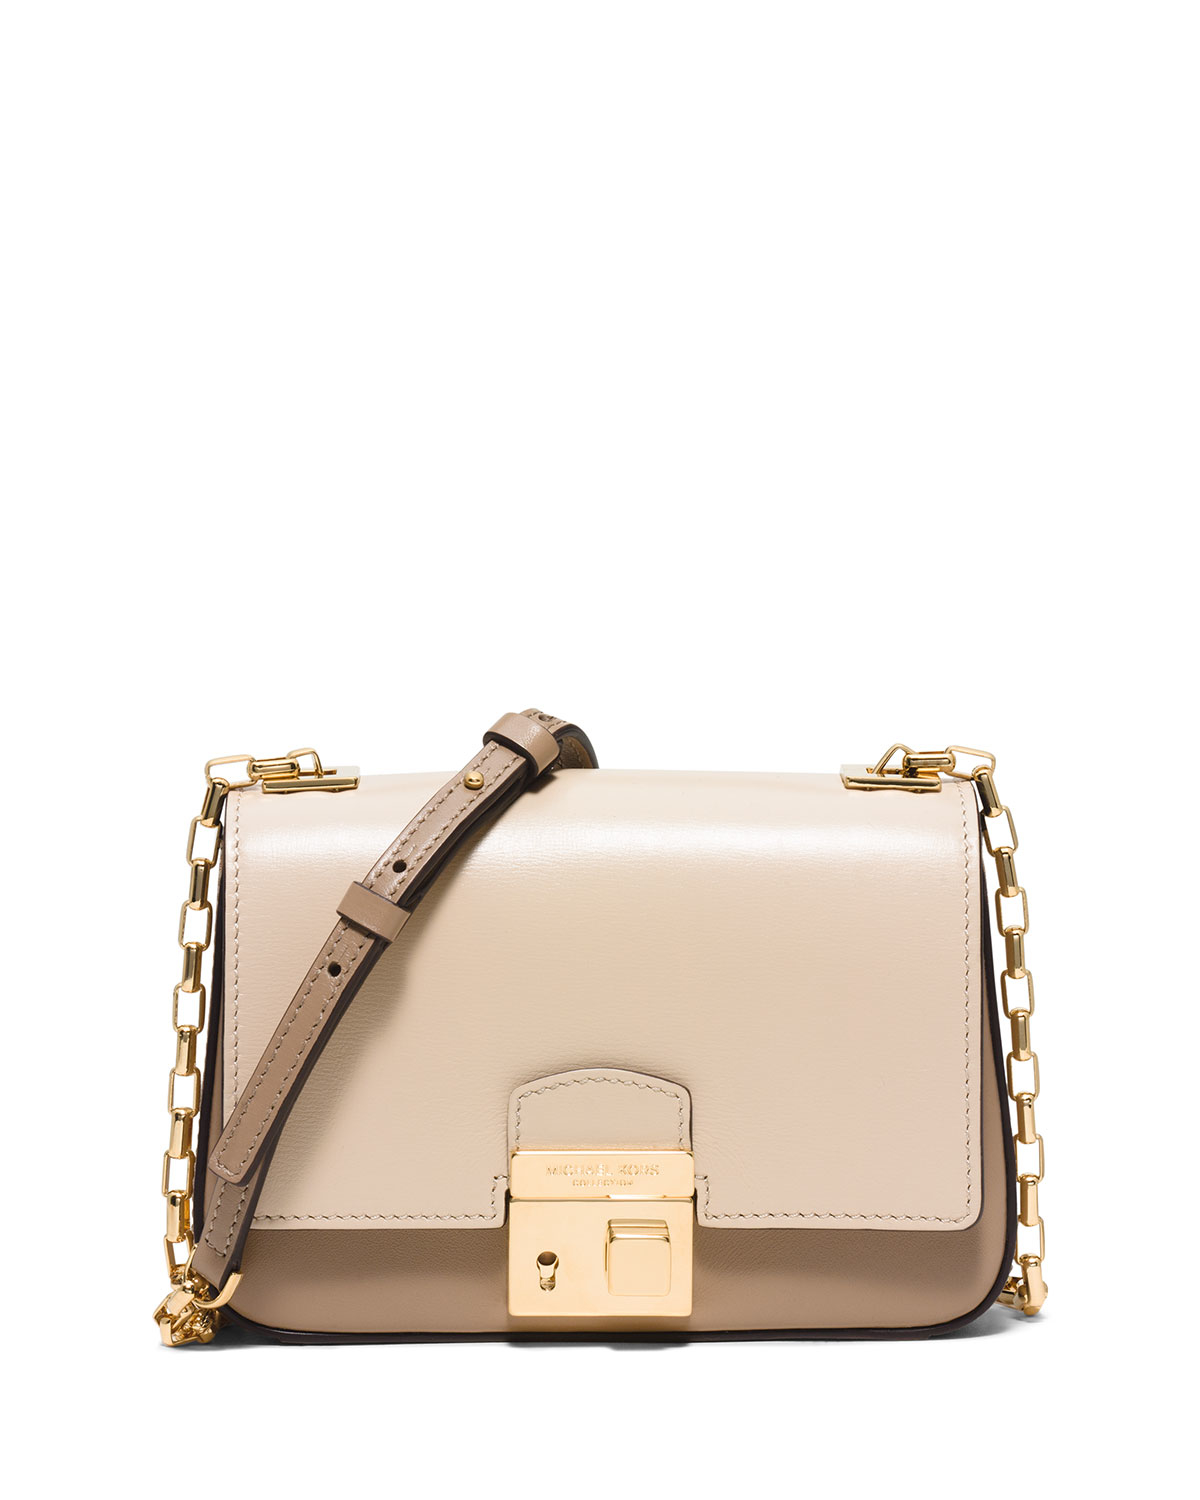 Lyst - Michael Kors Gia Small Chain-Strap Shoulder Bag in Natural